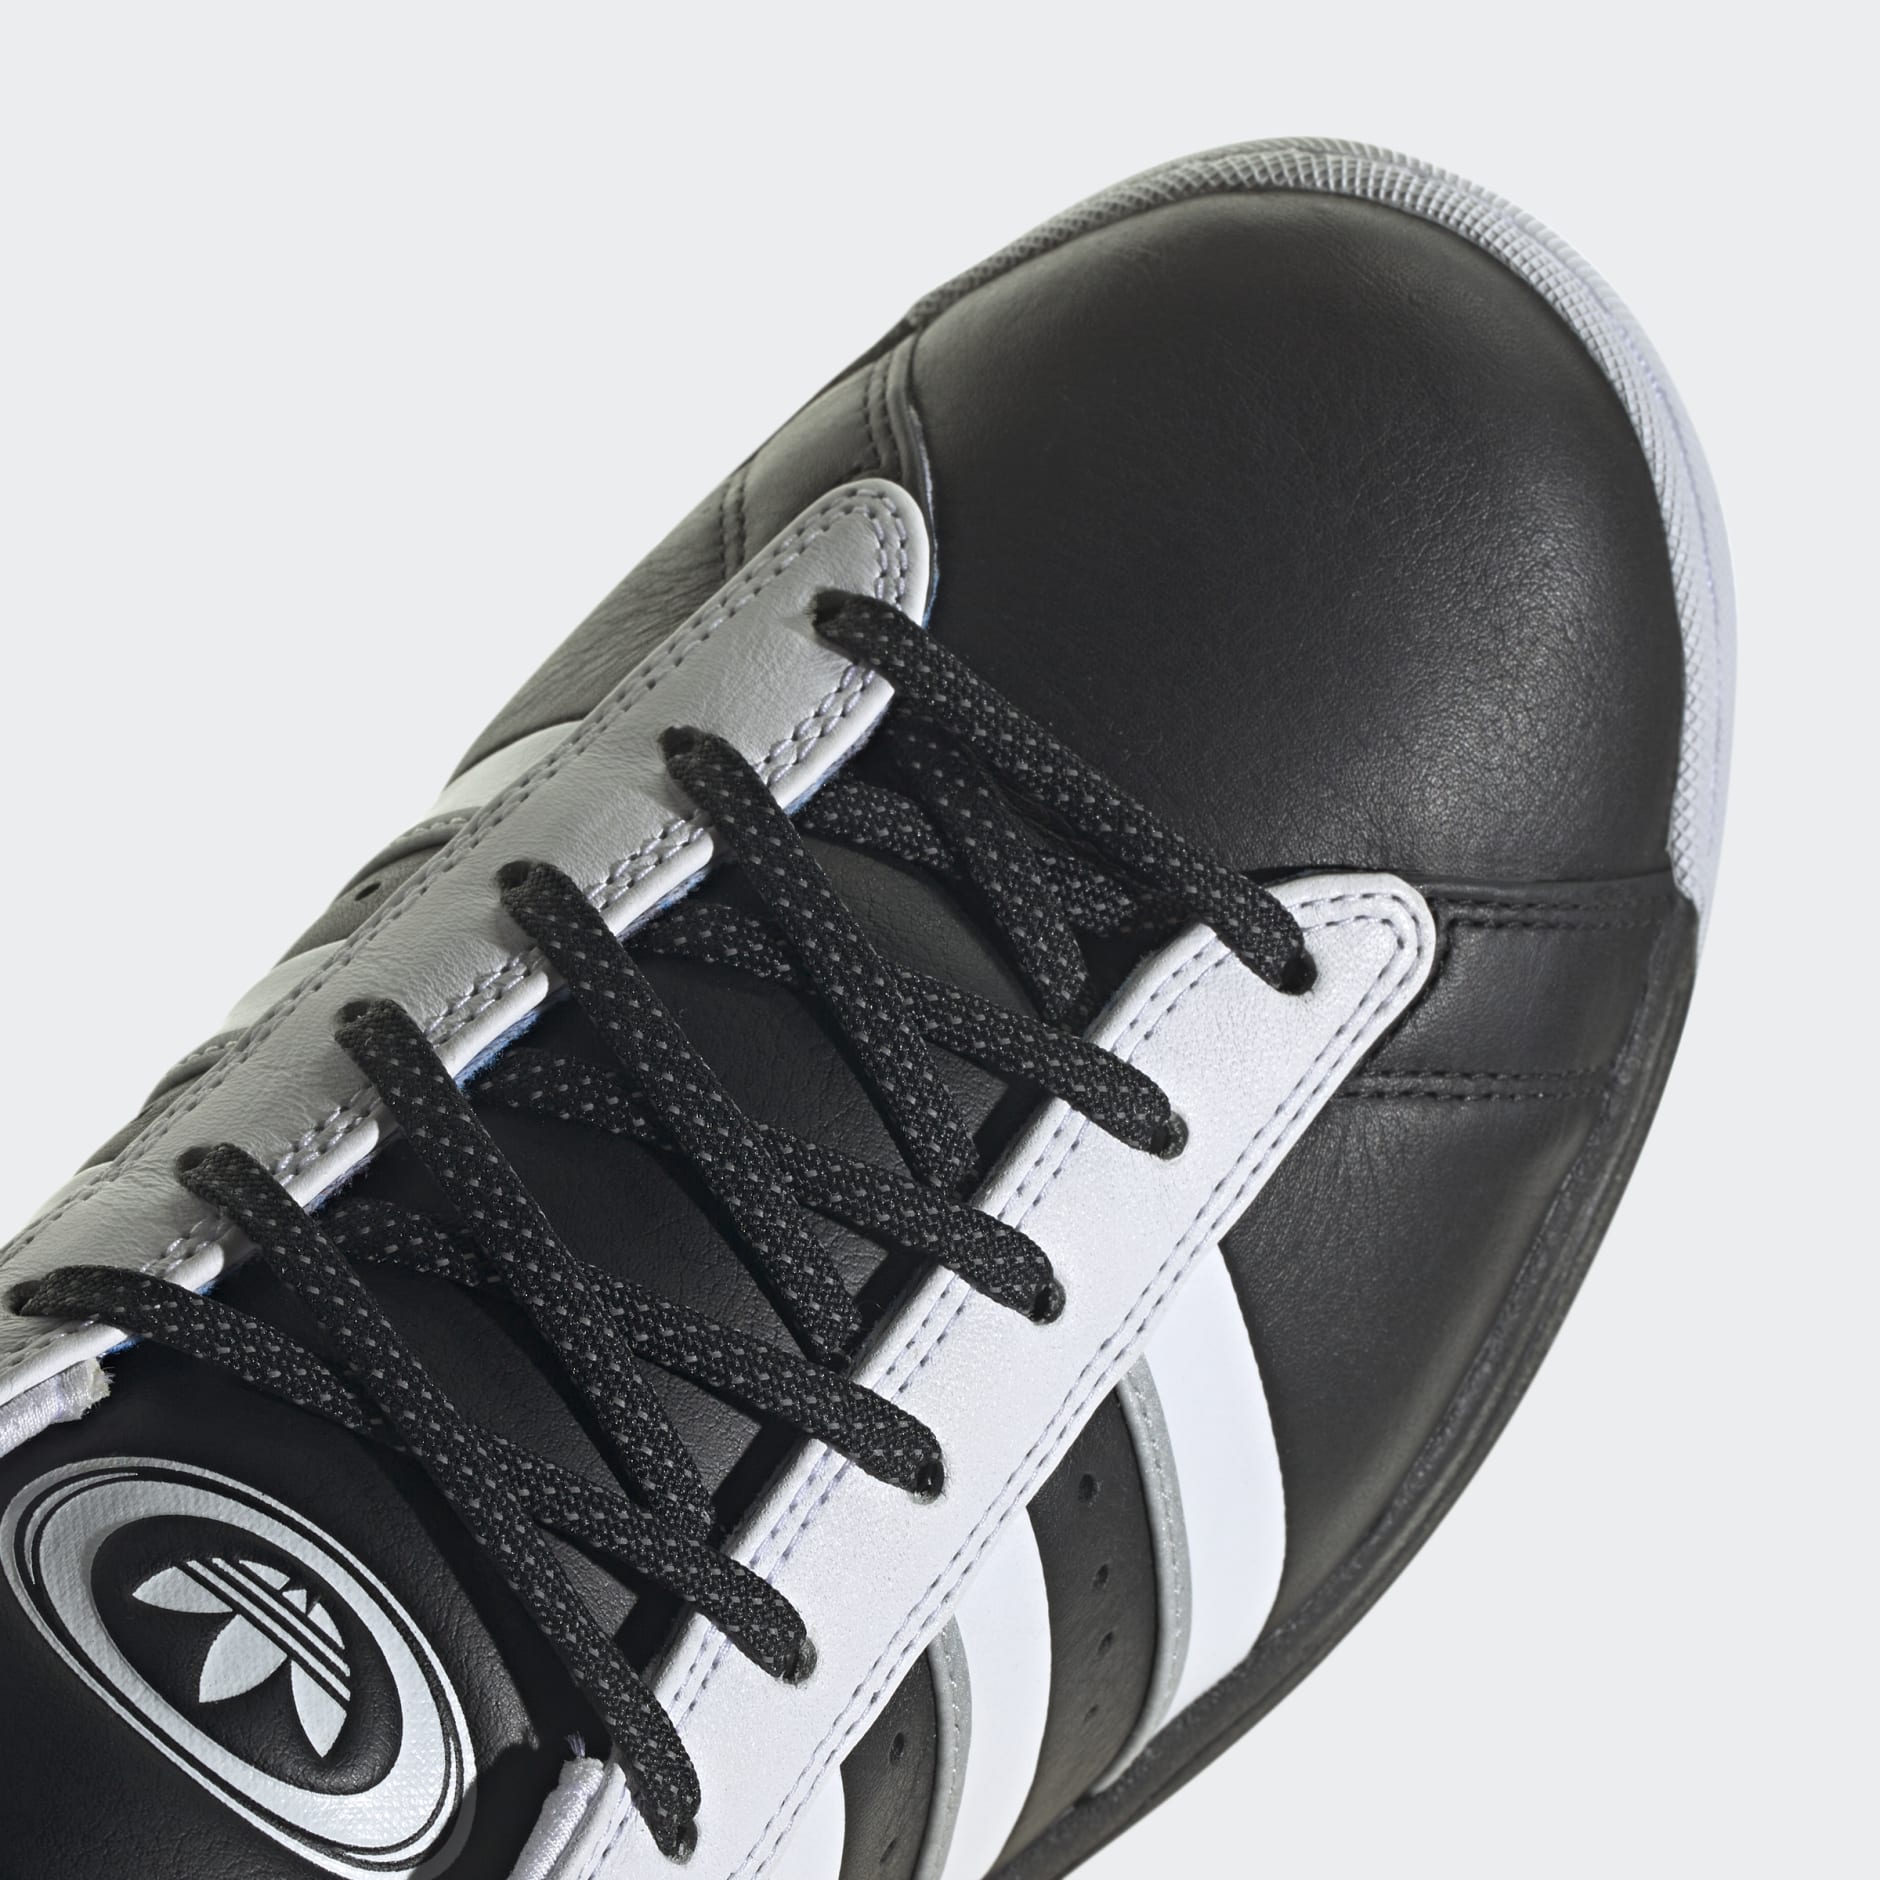 Shoes - Campus Shoes - Black | adidas South Africa